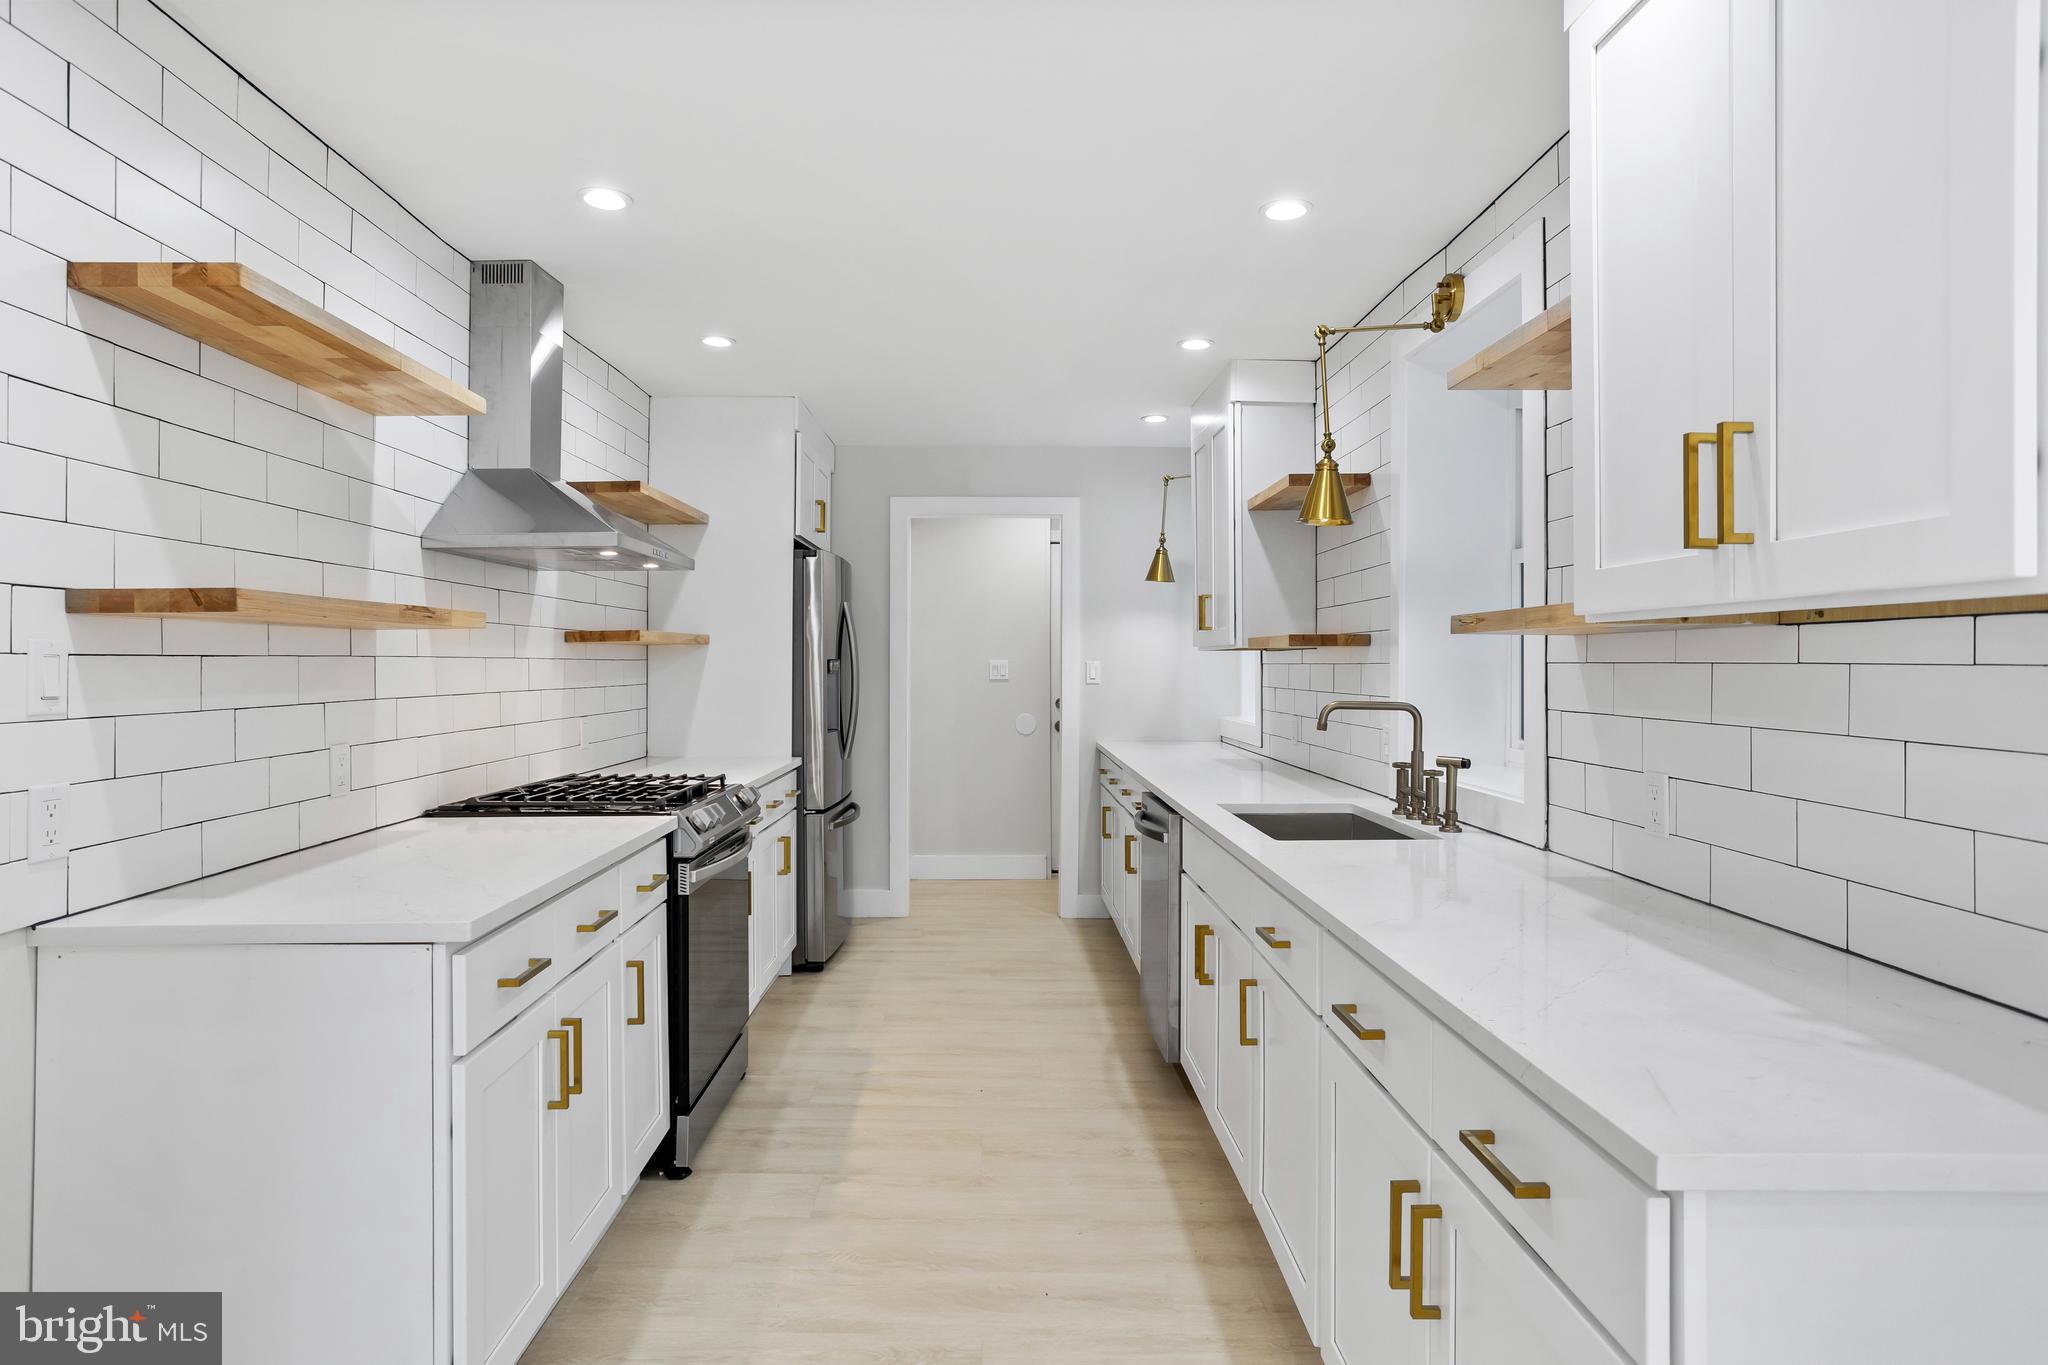 a large white kitchen with stainless steel appliances